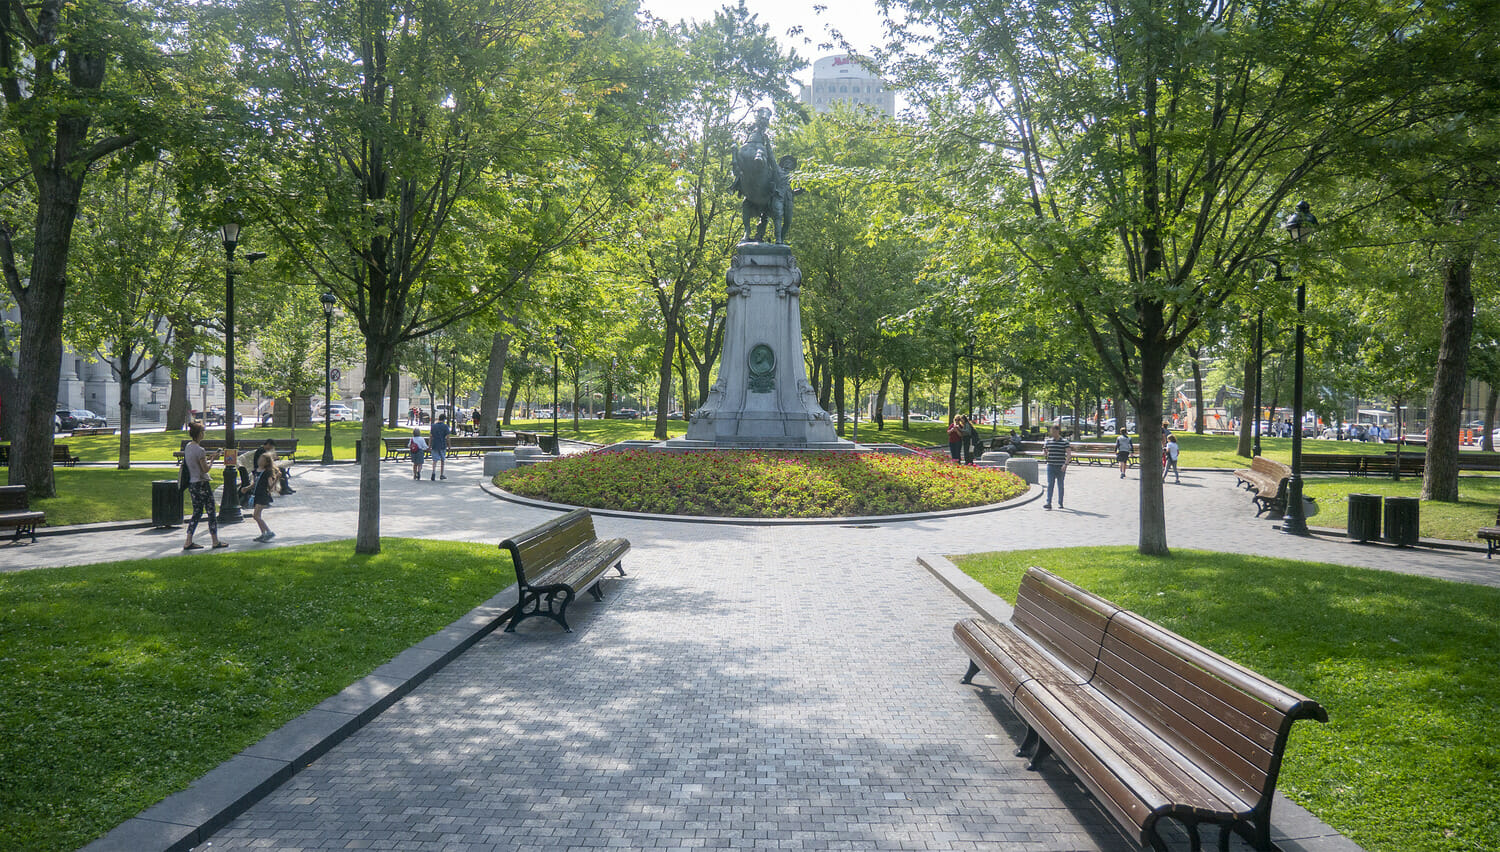 A park with benches and a statue.